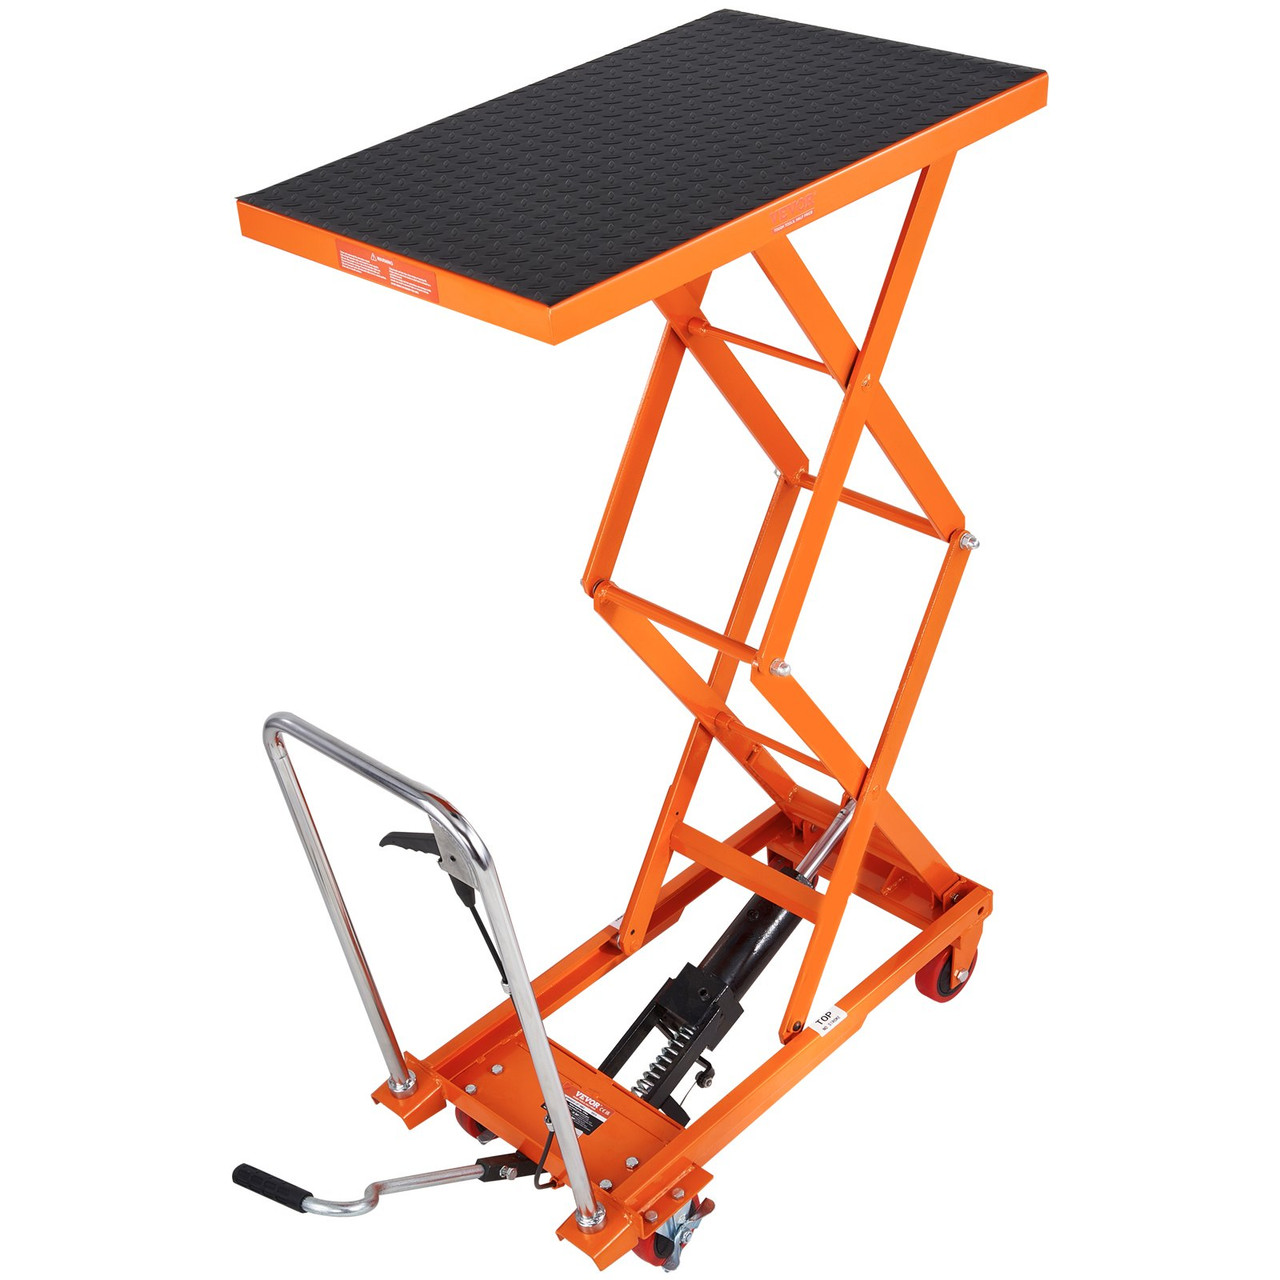 VEVOR Hydraulic Lift Table Cart, 330lbs Capacity 50" Lifting Height, Manual Double Scissor Lift Table with 4 Wheels and Non-slip Pad, Hydraulic Scissor Cart for Material Handling and Transportation